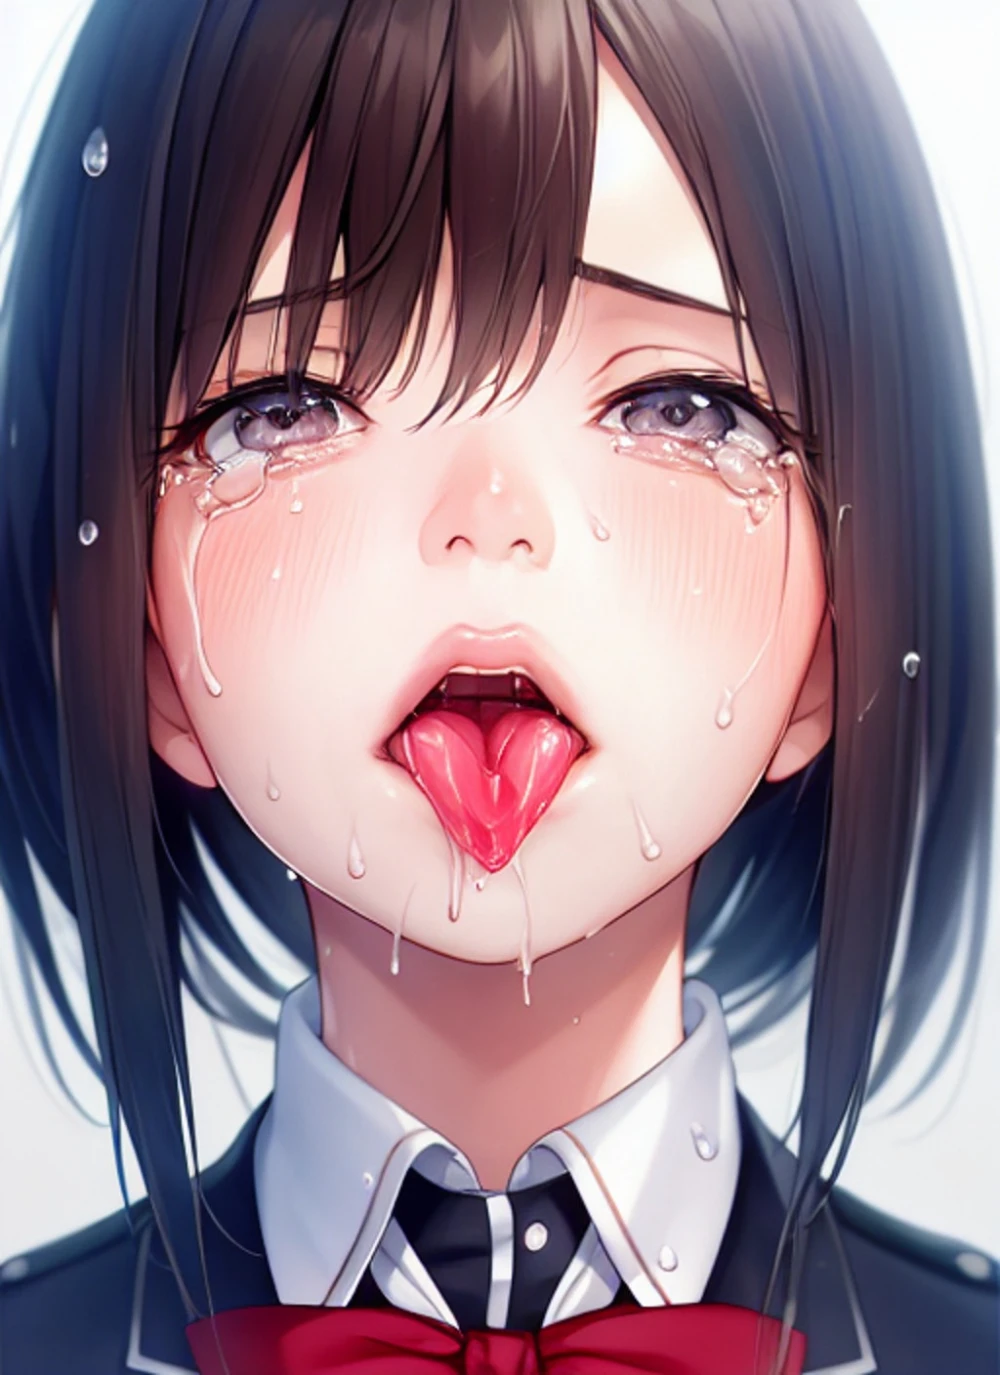 ahegao-anime-style-adults-only-3